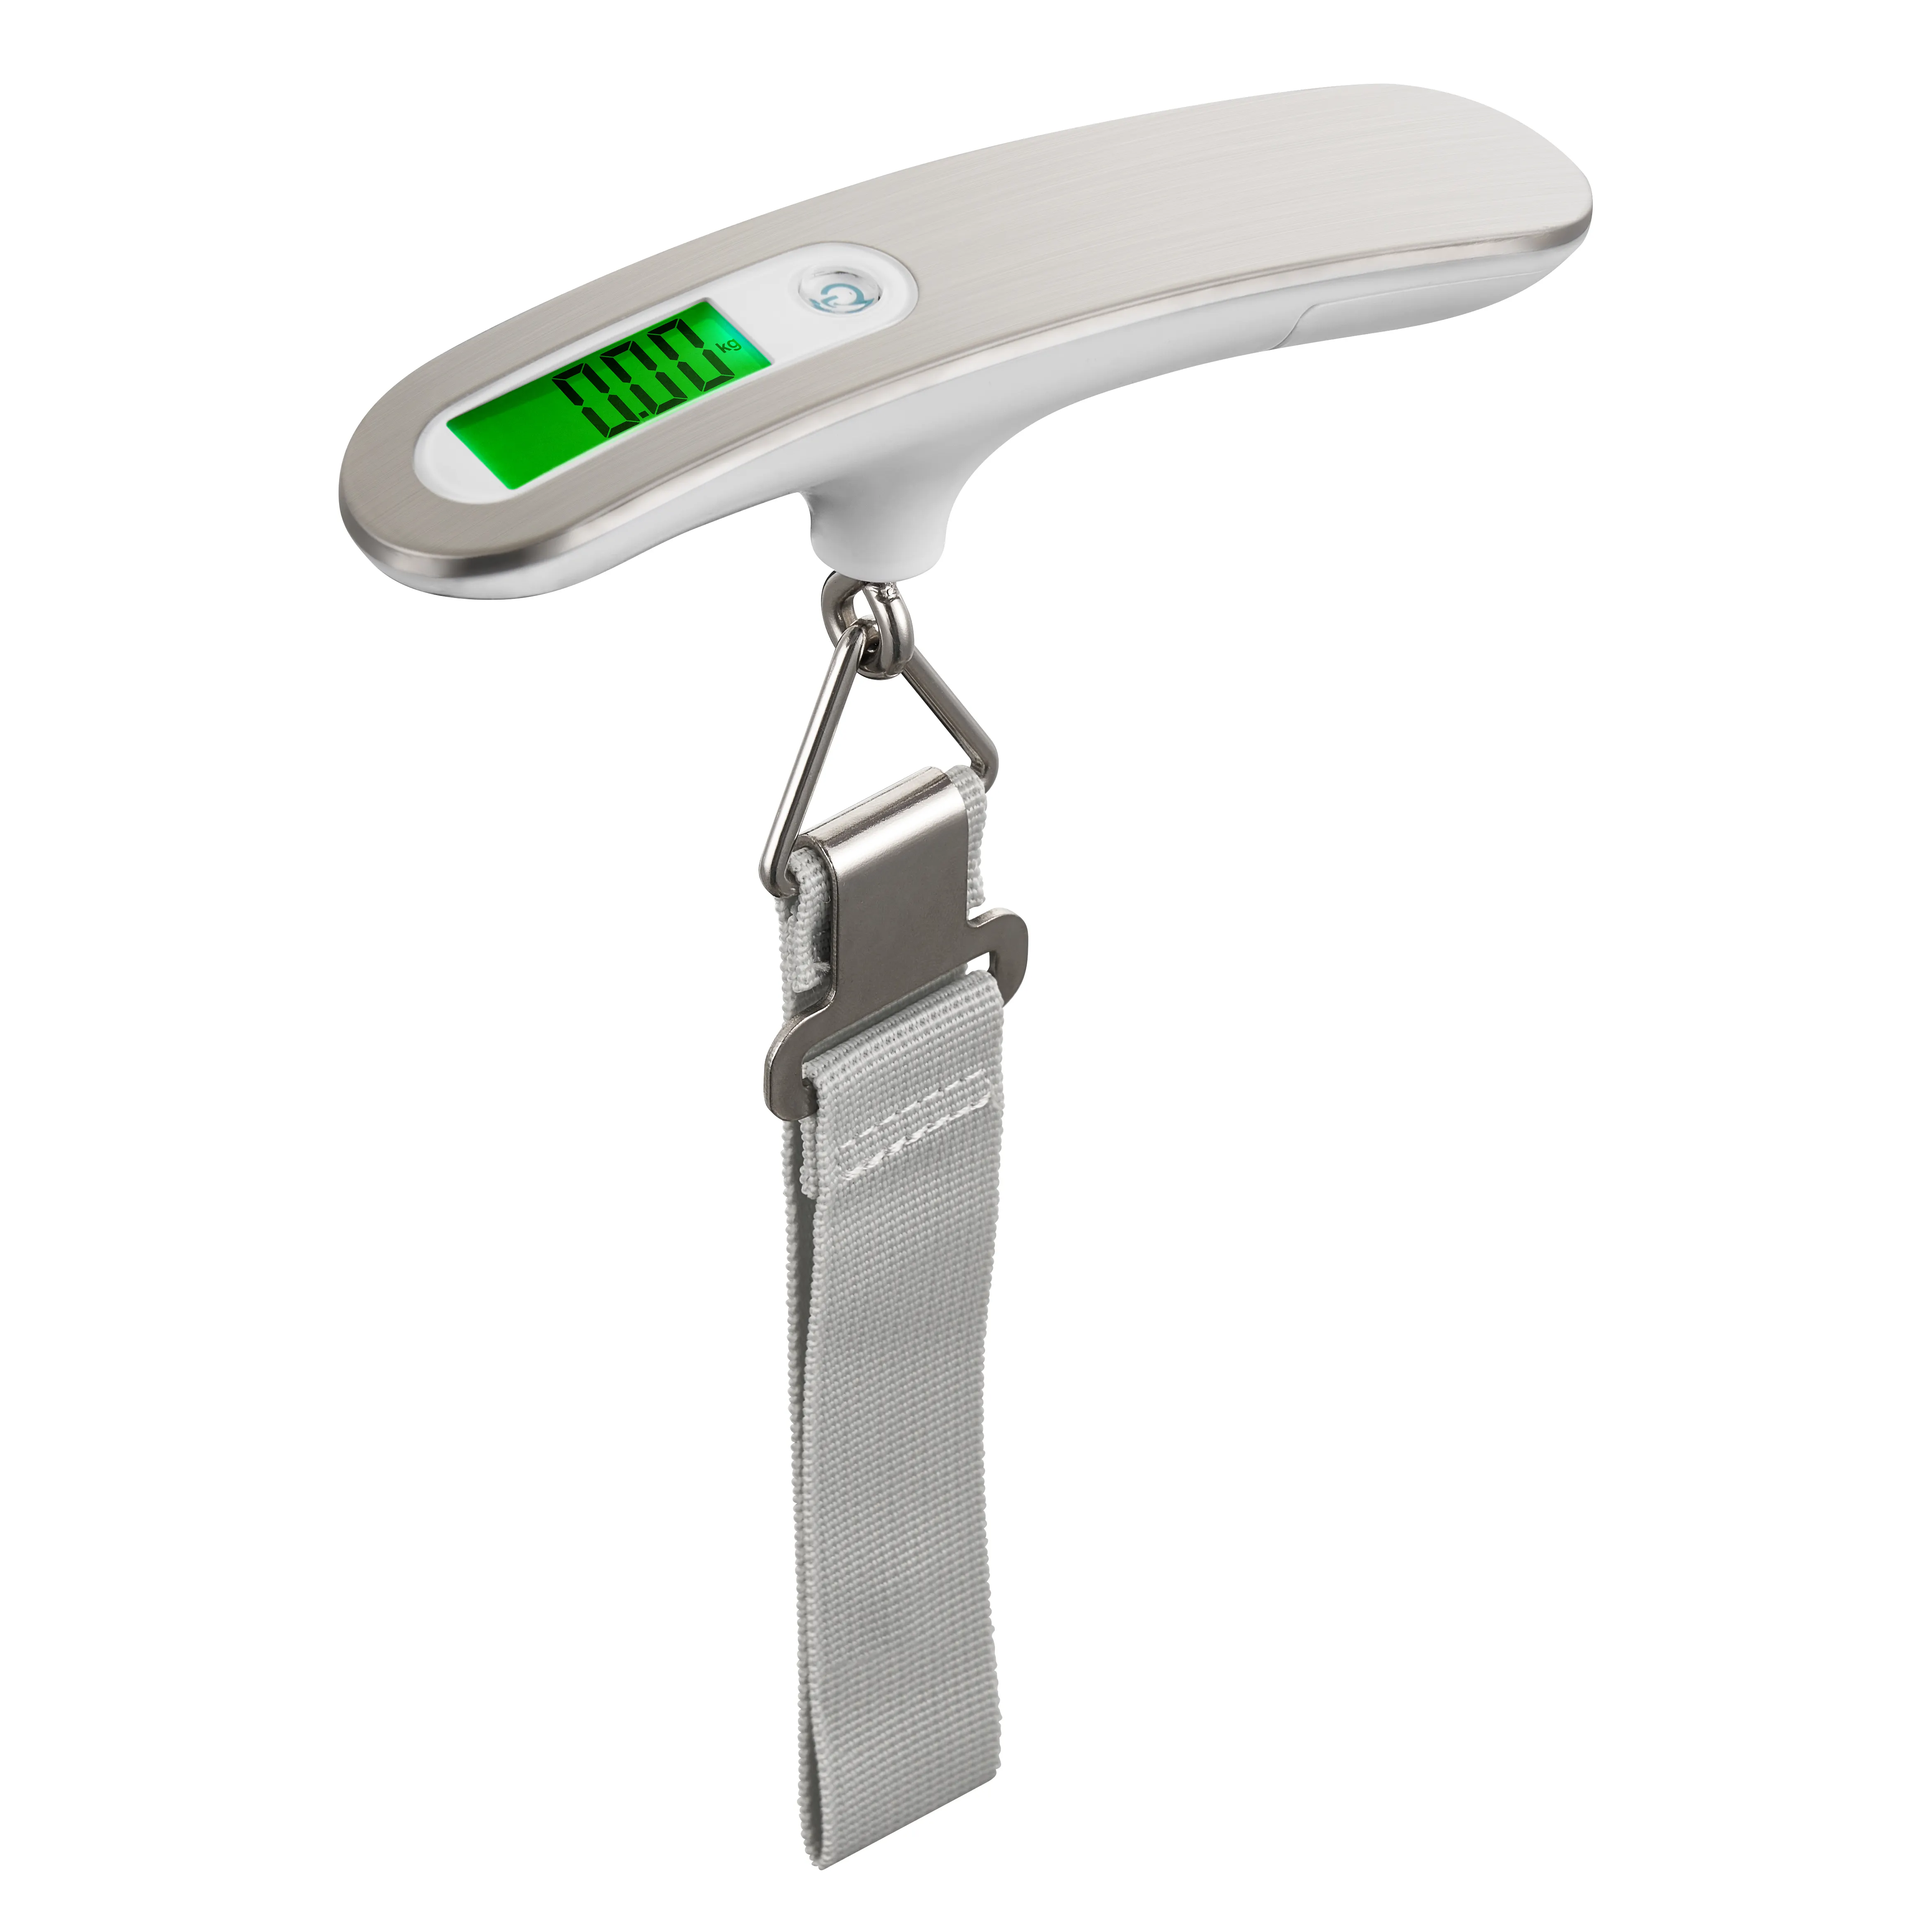 Mini Hand Held Portable Balance Digital Luggage Scale Electronic Scale Fish Scale